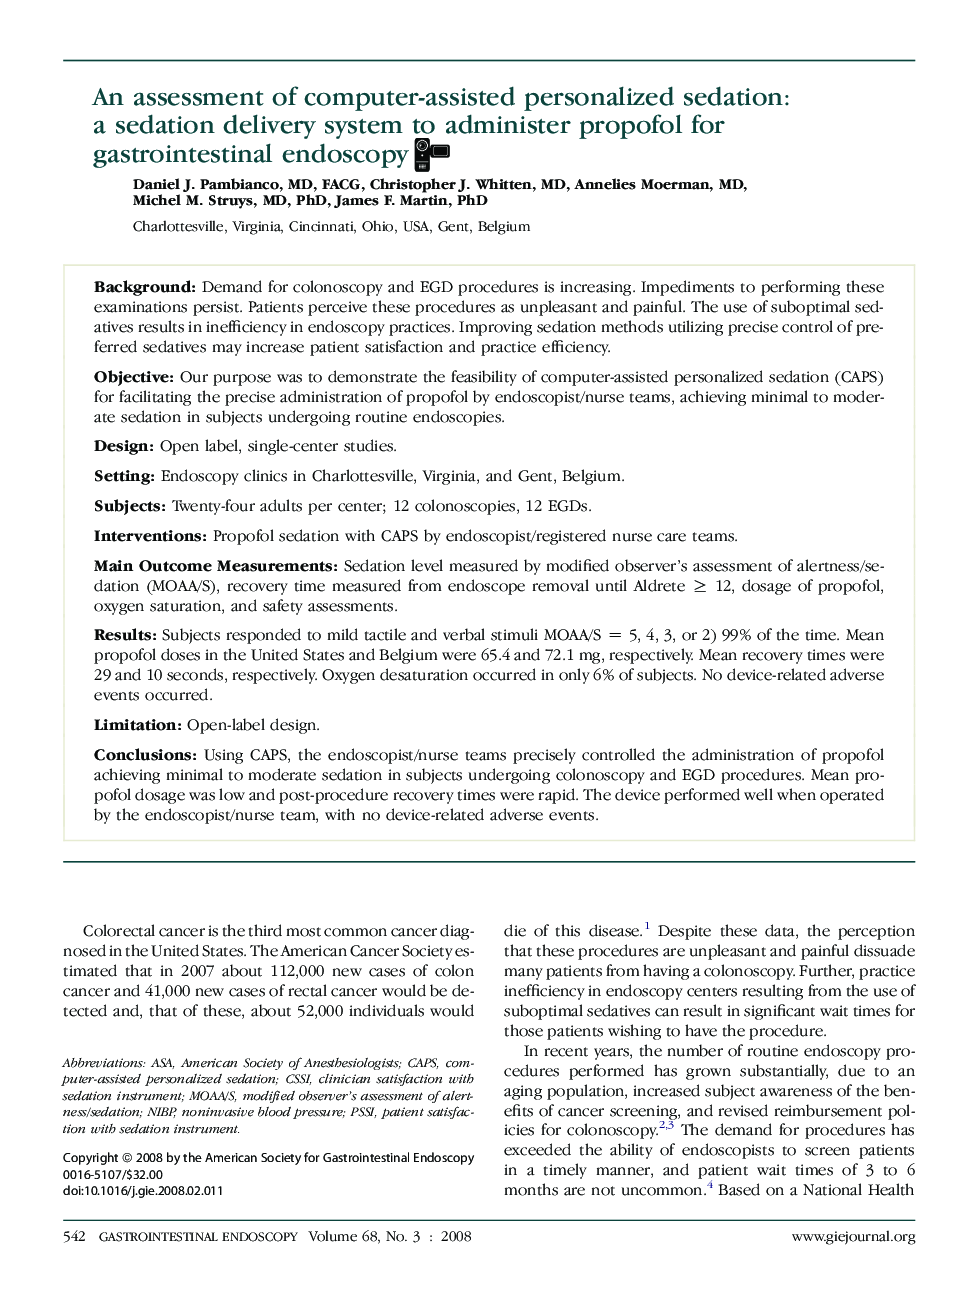 An assessment of computer-assisted personalized sedation: a sedation delivery system to administer propofol for gastrointestinal endoscopy